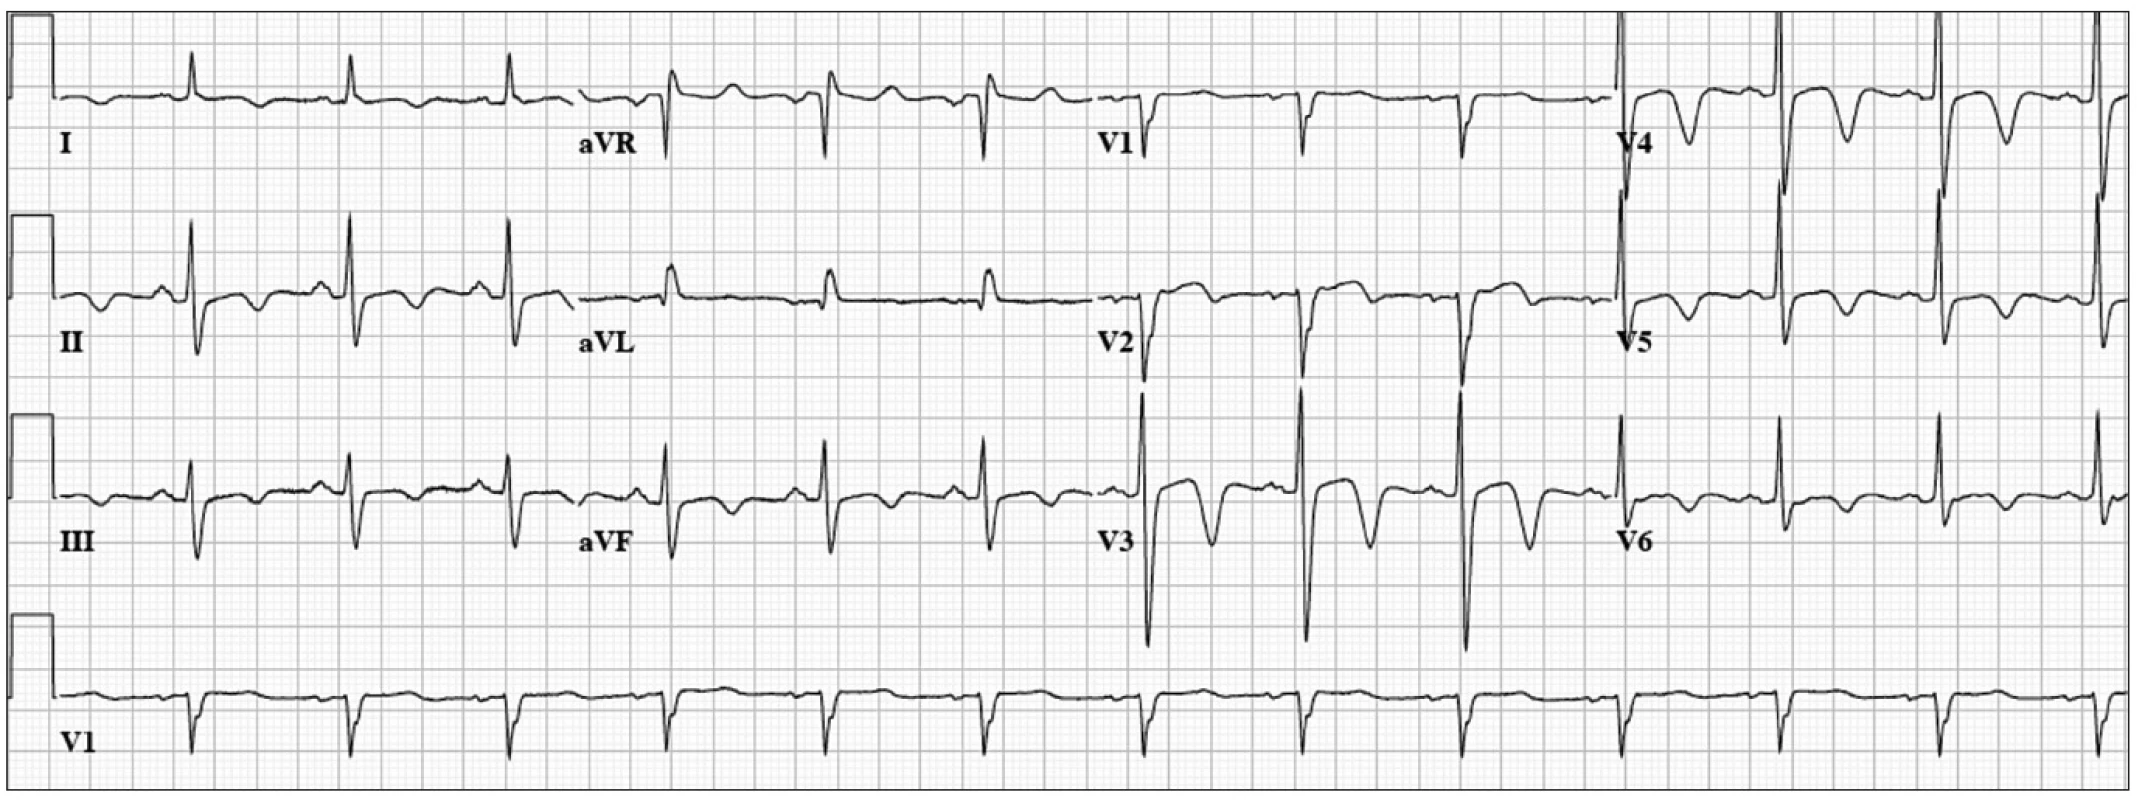 52 year-old woman with acute chest pain and dyspnea.